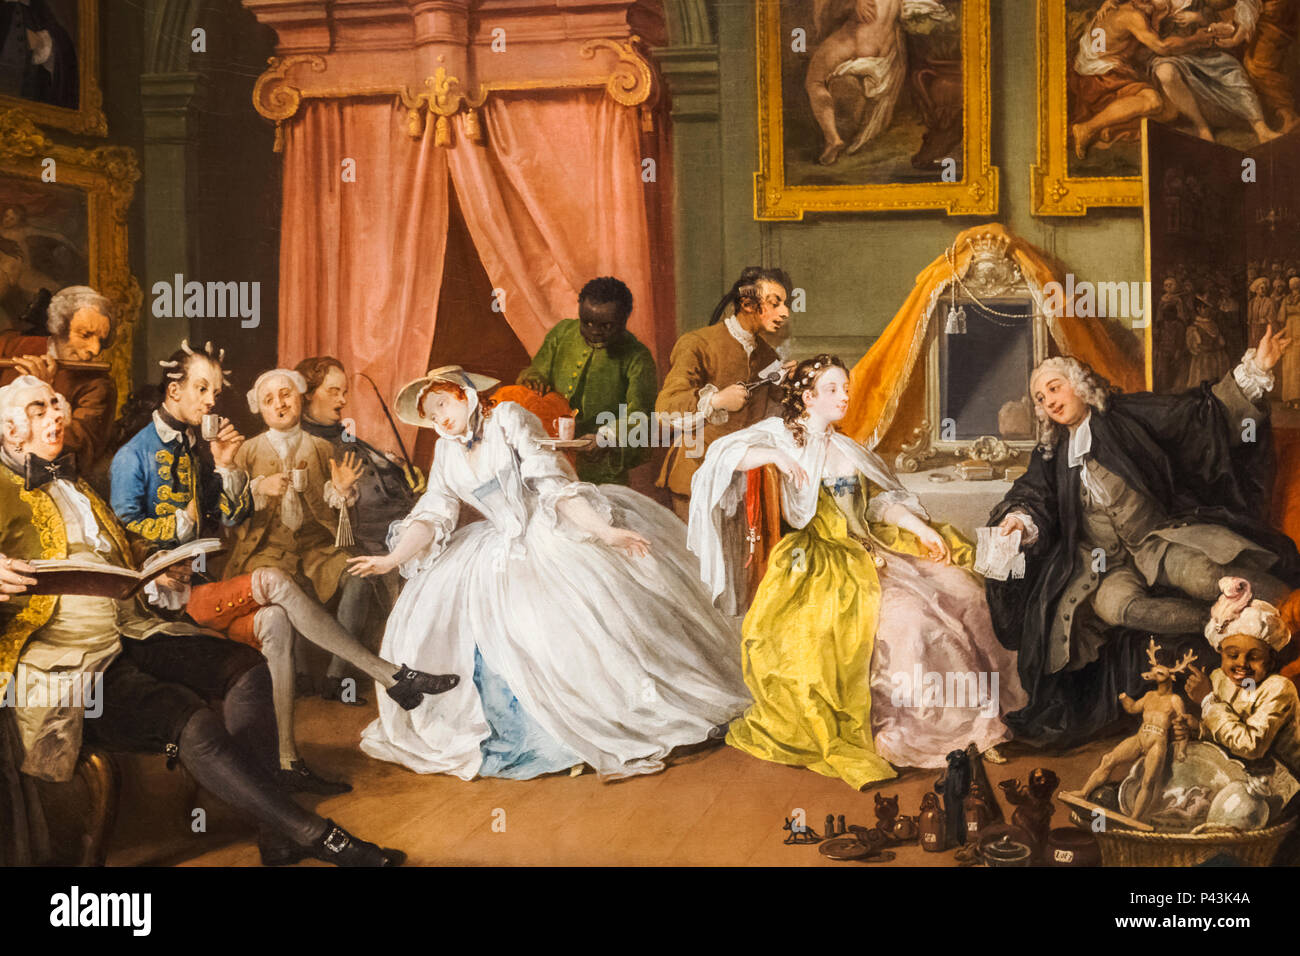 Painting from The Marriage A-la-Mode Series titled 'The Toilette' by William Hogarth dated 1743 Stock Photo